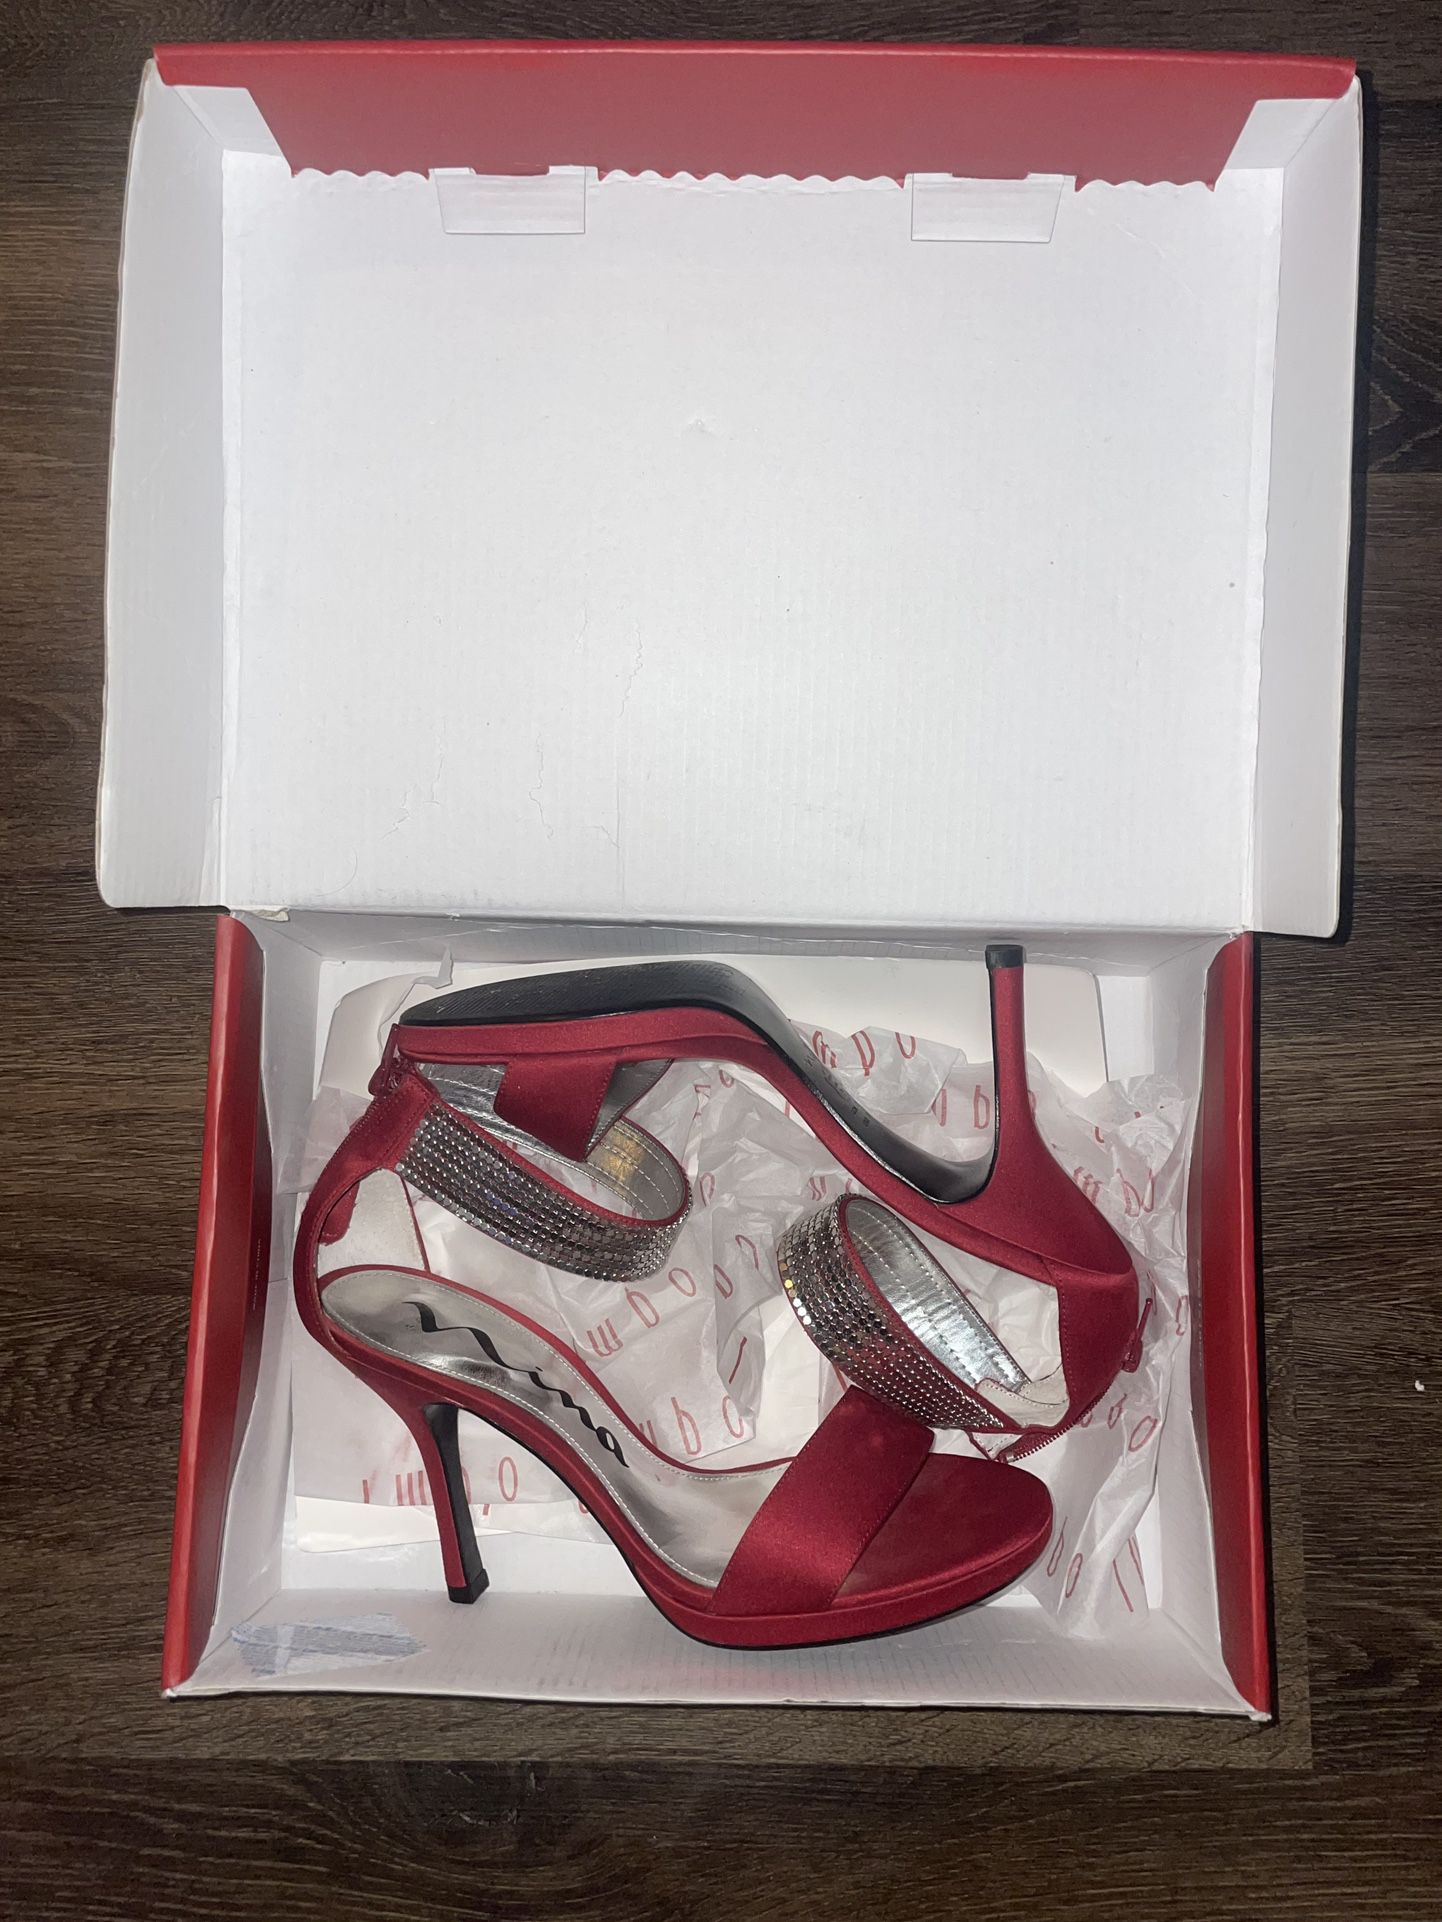 Impo Red High Heels